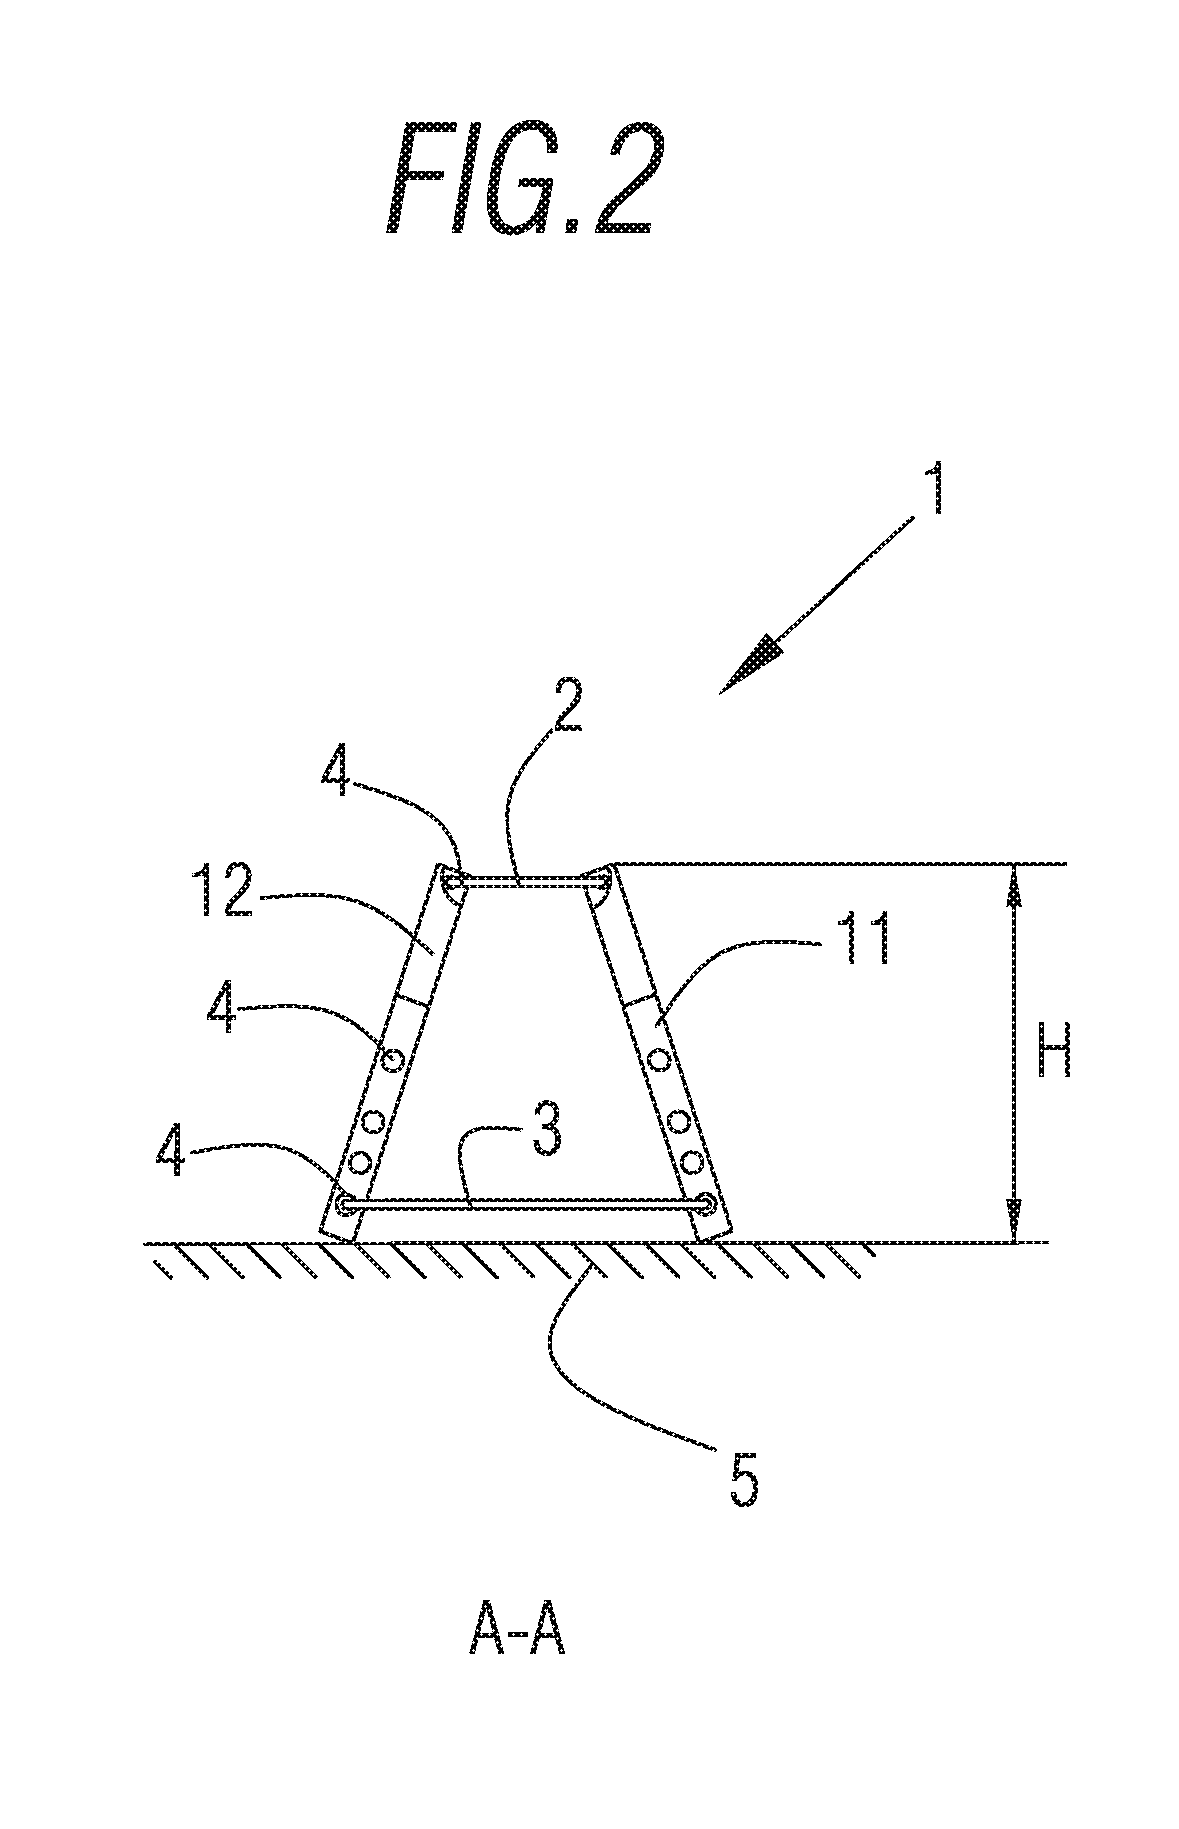 Muscle-stretching apparatus